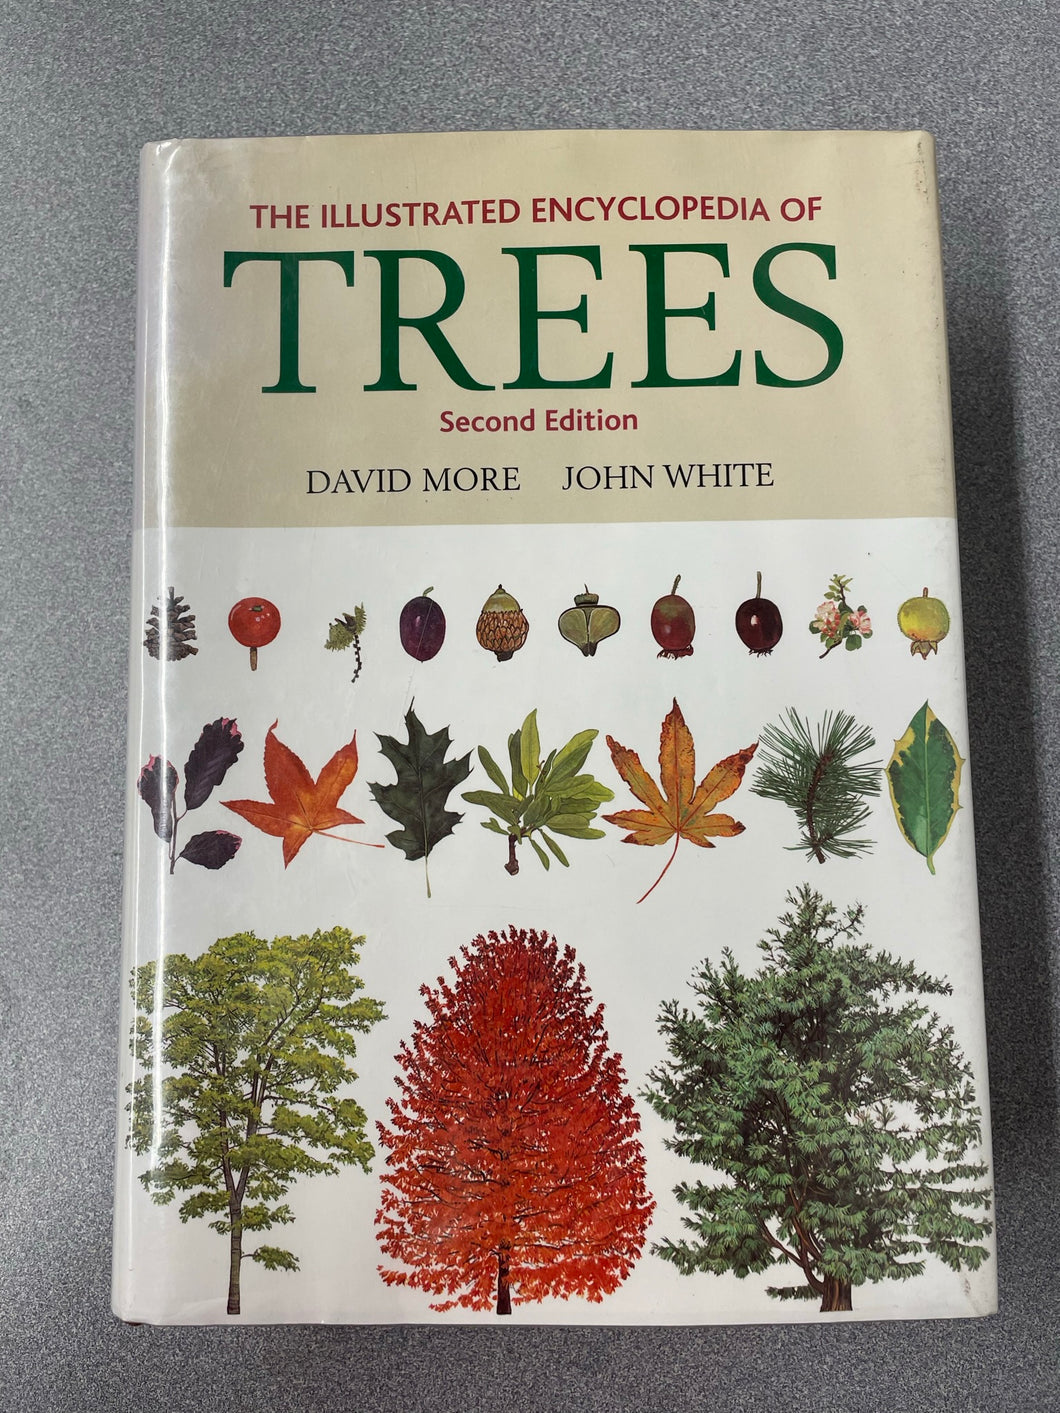 The Illustrated Encyclopedia of Trees, Second Edition, More, David and John White [2002] SN  7/23